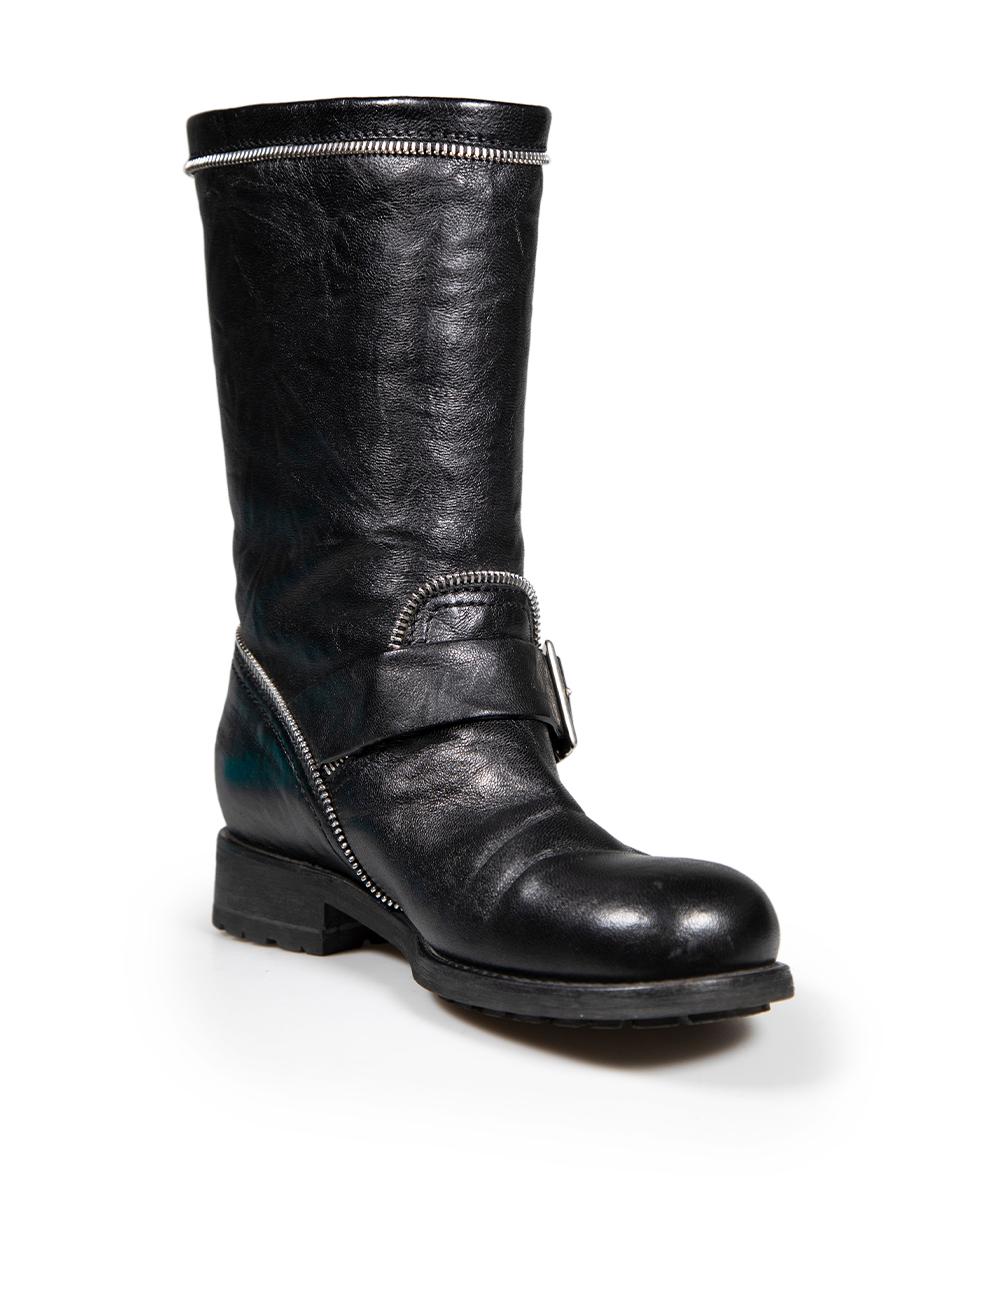 CONDITION is Very good. Minimal wear to boots is evident. Minimal wear to both boot toes with light abrasions to the leather on this used Jimmy Choo designer resale item.
 
 Details
 Black
 Leather
 Boots
 Mid calf
 Round toe
 Low heel
 Buckle and